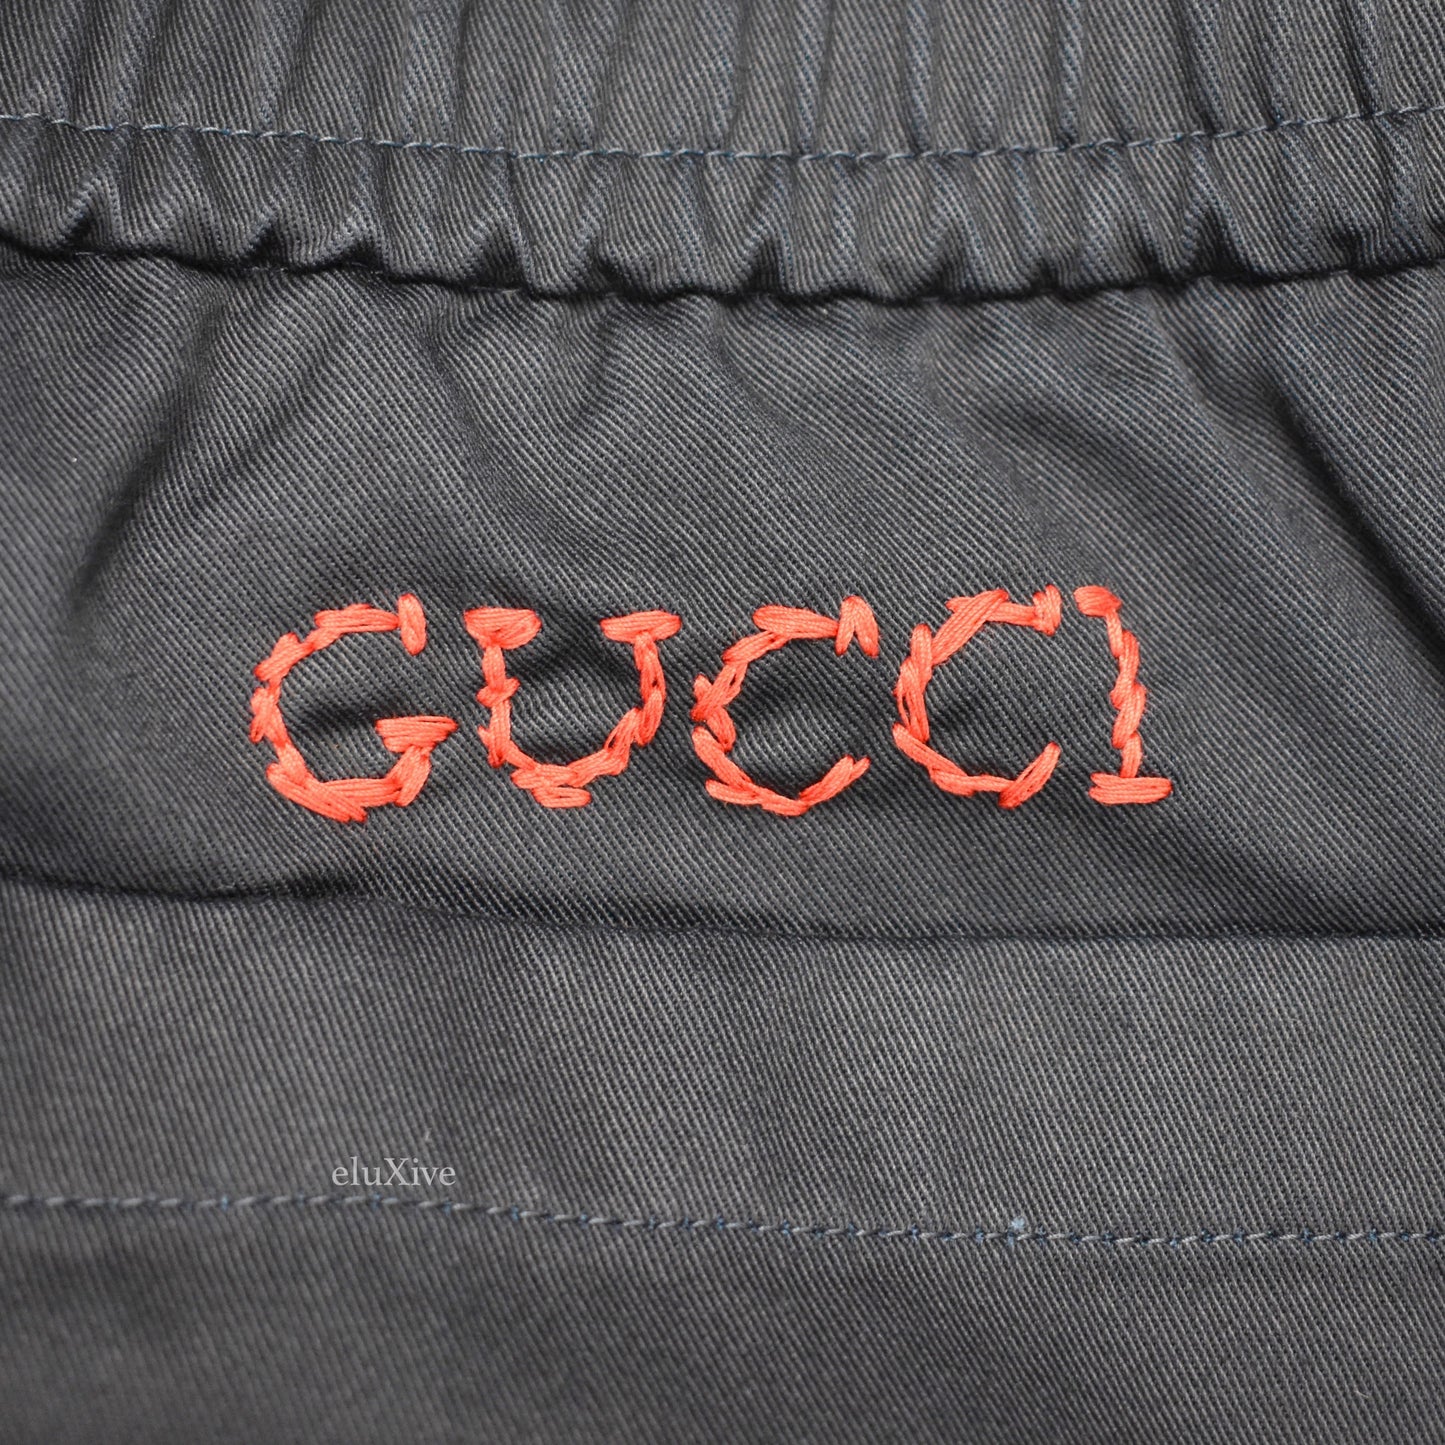 Gucci - Navy Hand Embroidered Logo Riding Pants